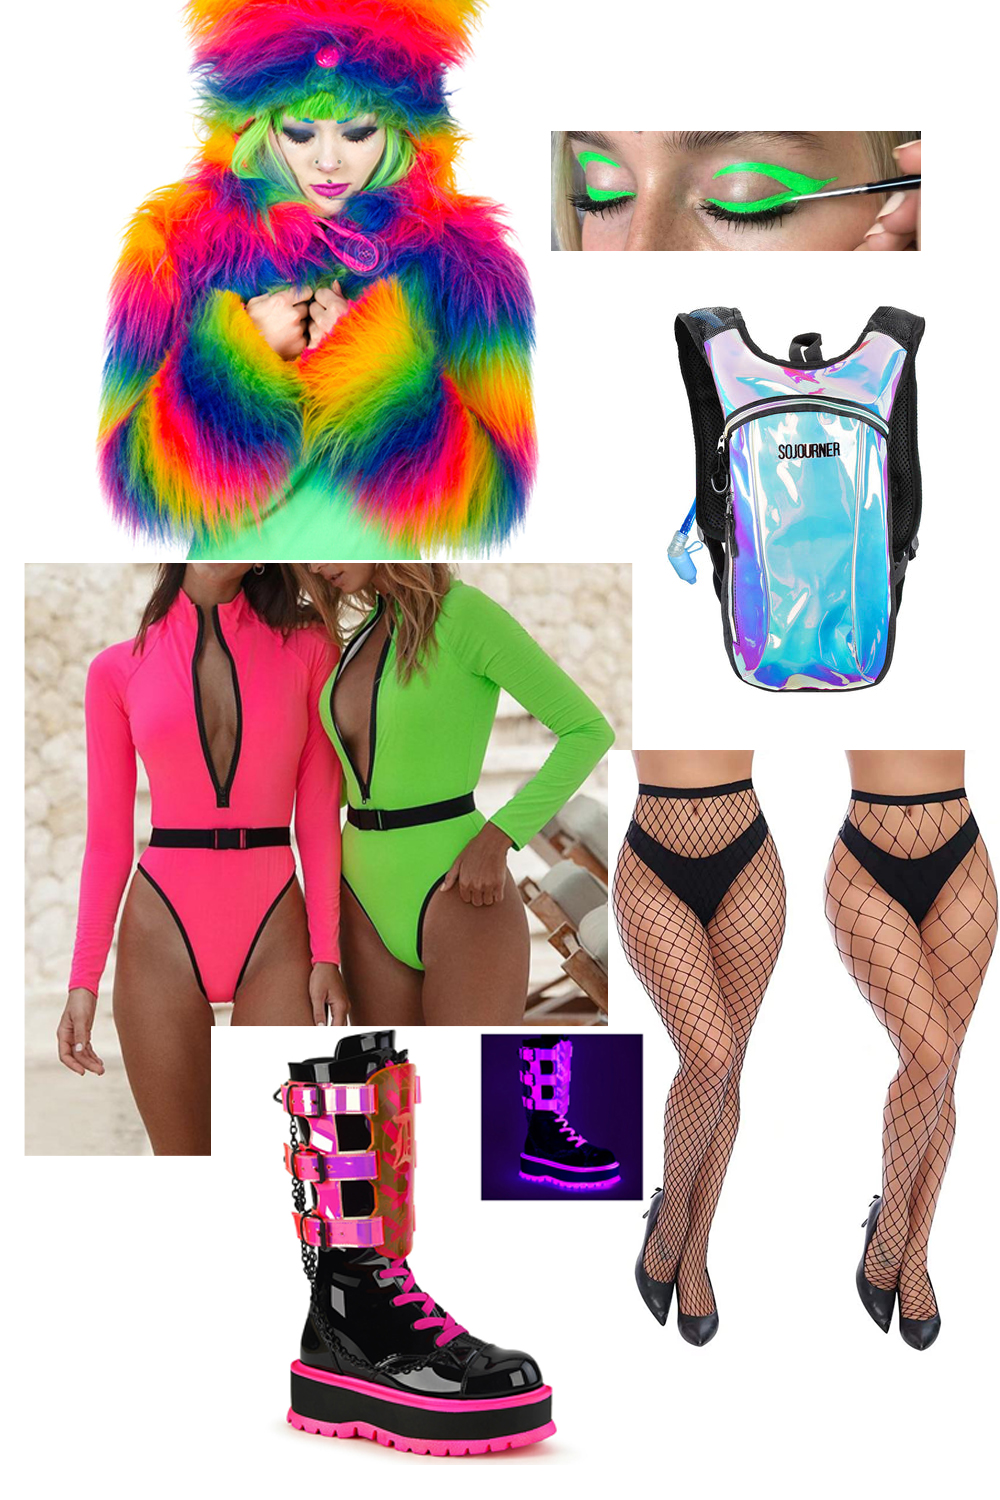 Ultra Music Festival 2022 – Women’s Outfits